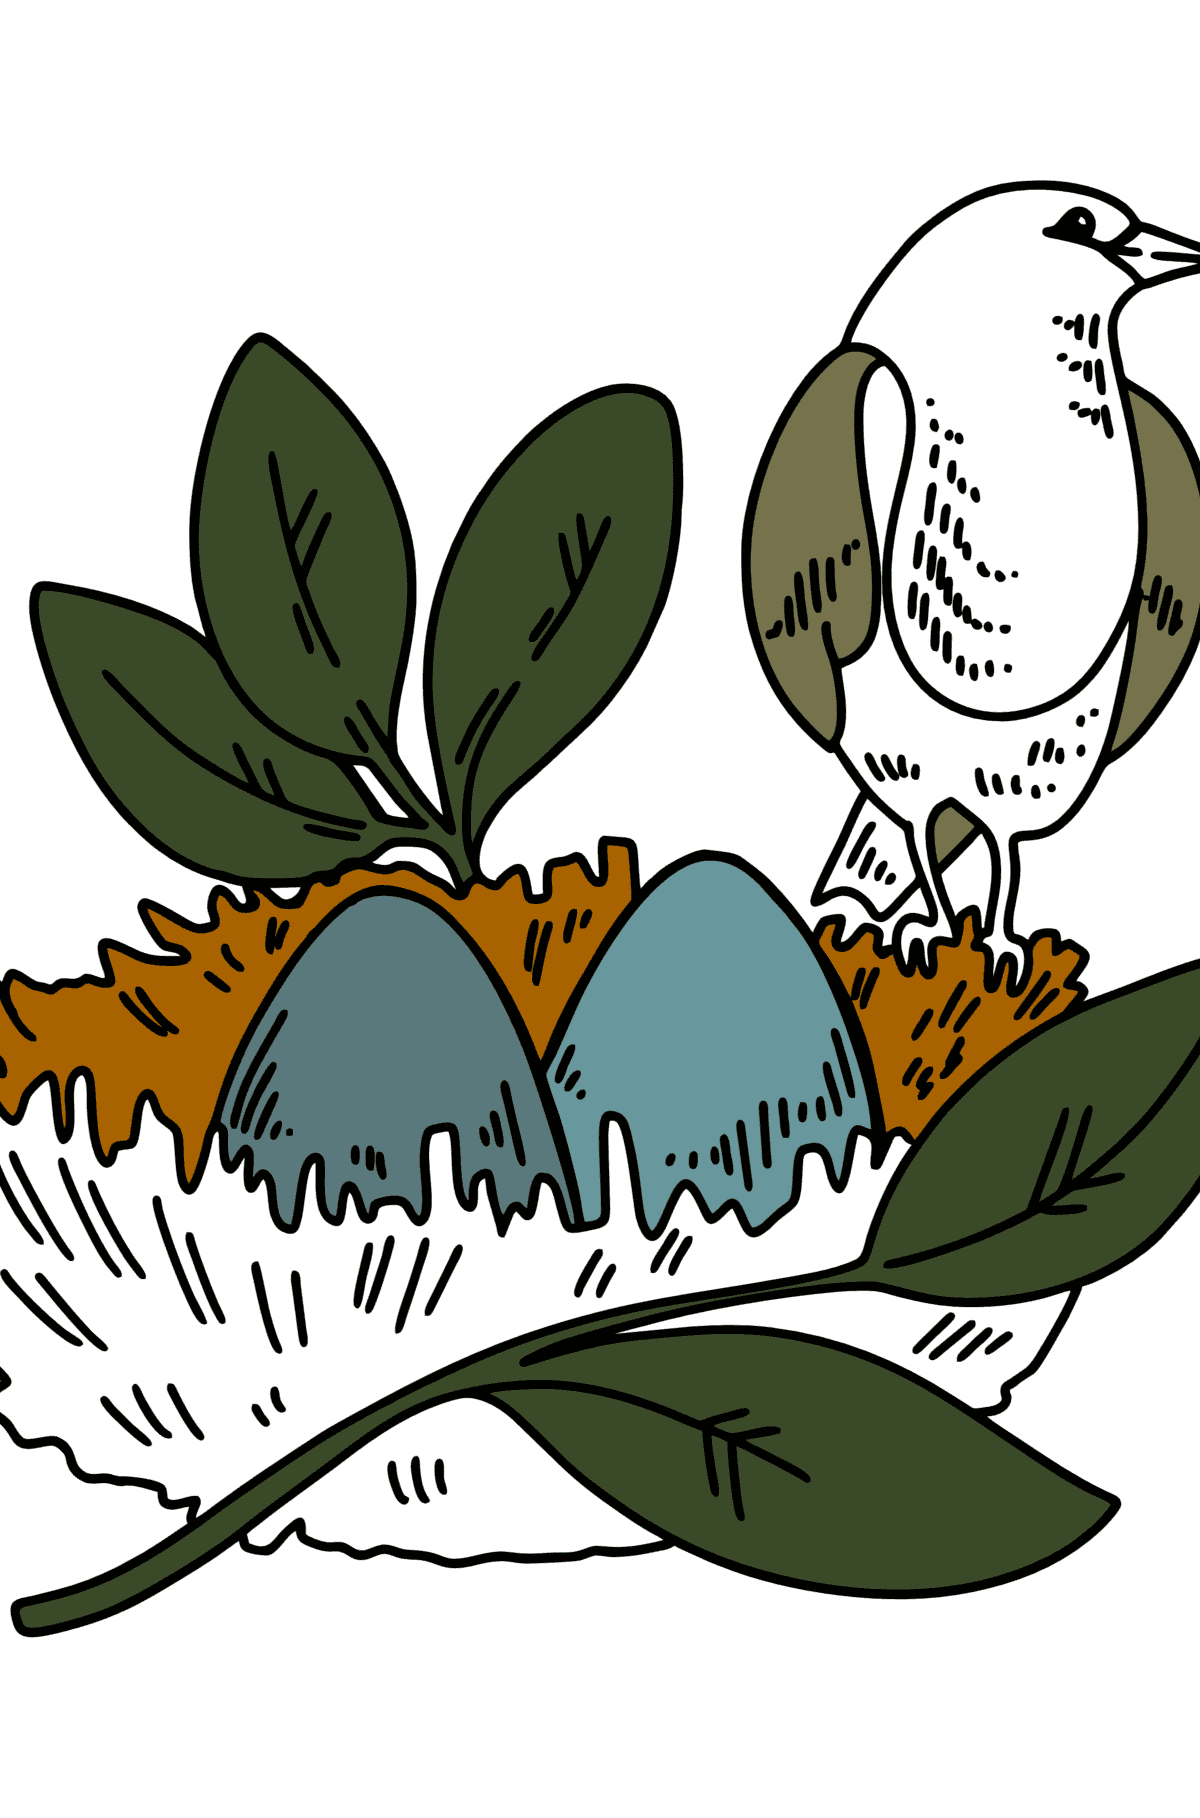 Coloring page - Thrush Nest - Coloring Pages for Kids